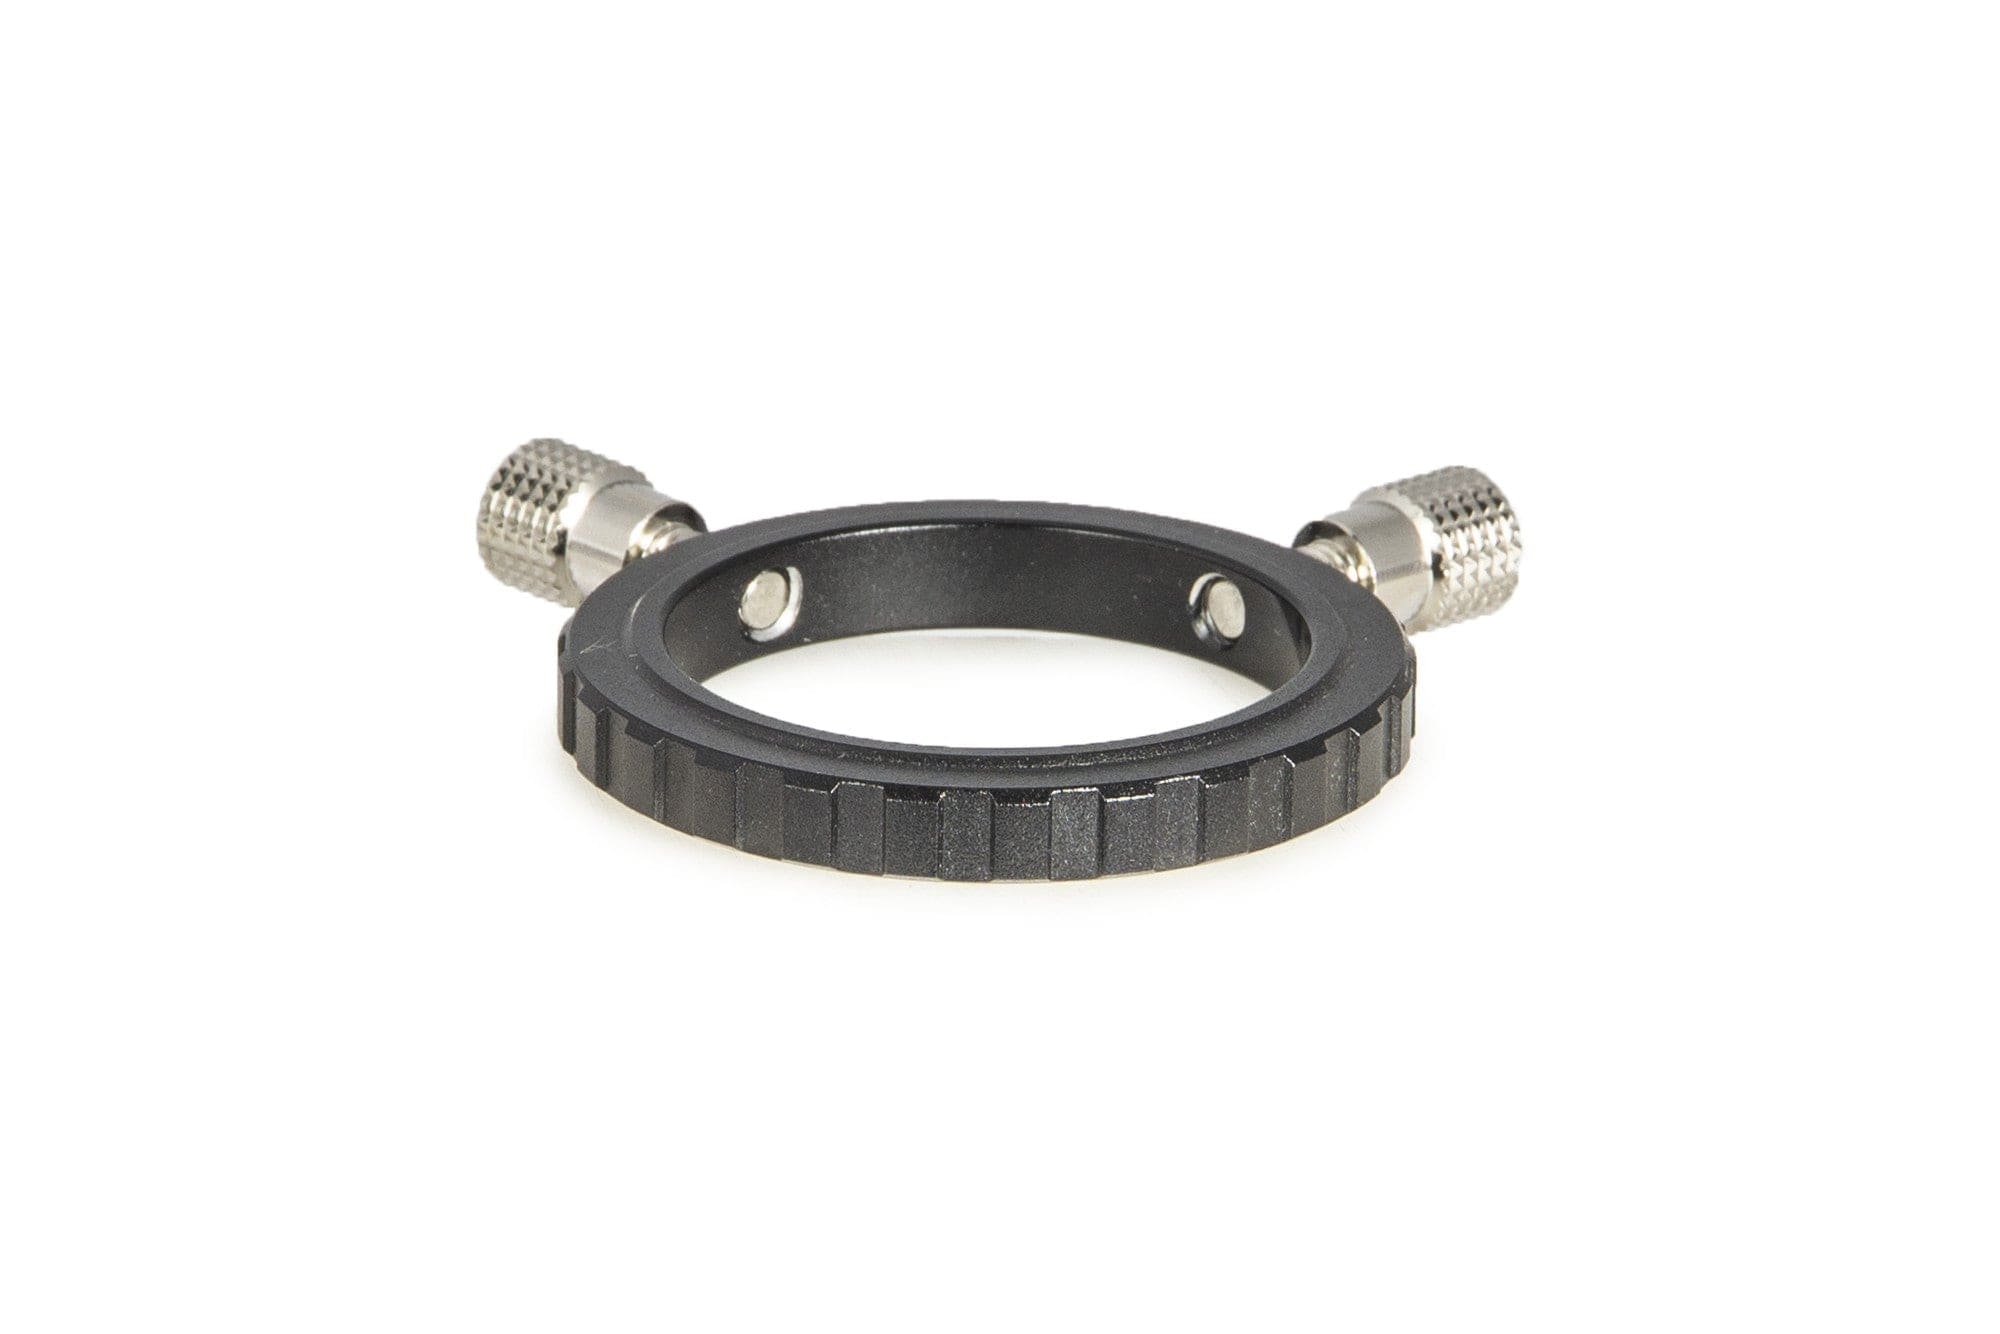 Baader Planetarium Accessory Baader Stop Ring 1¼" (T-2 part #30) - 1905131